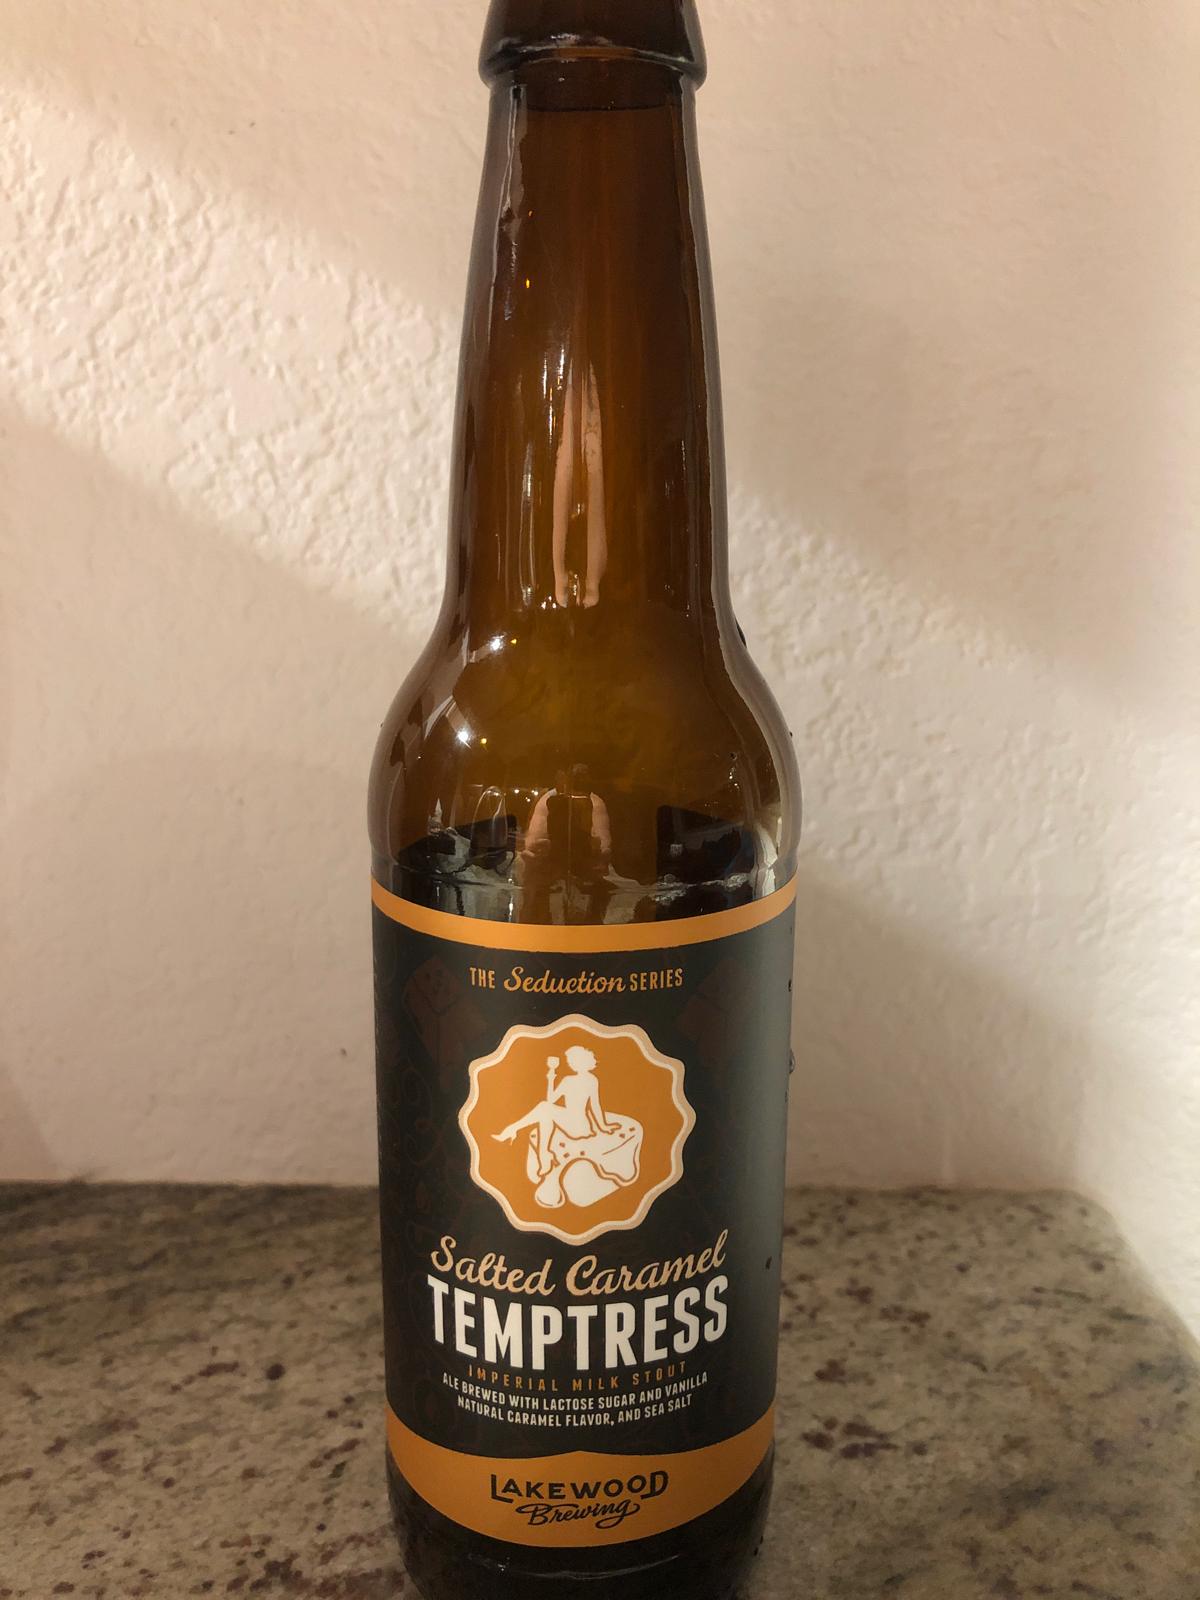 Temptress with Salted Caramel